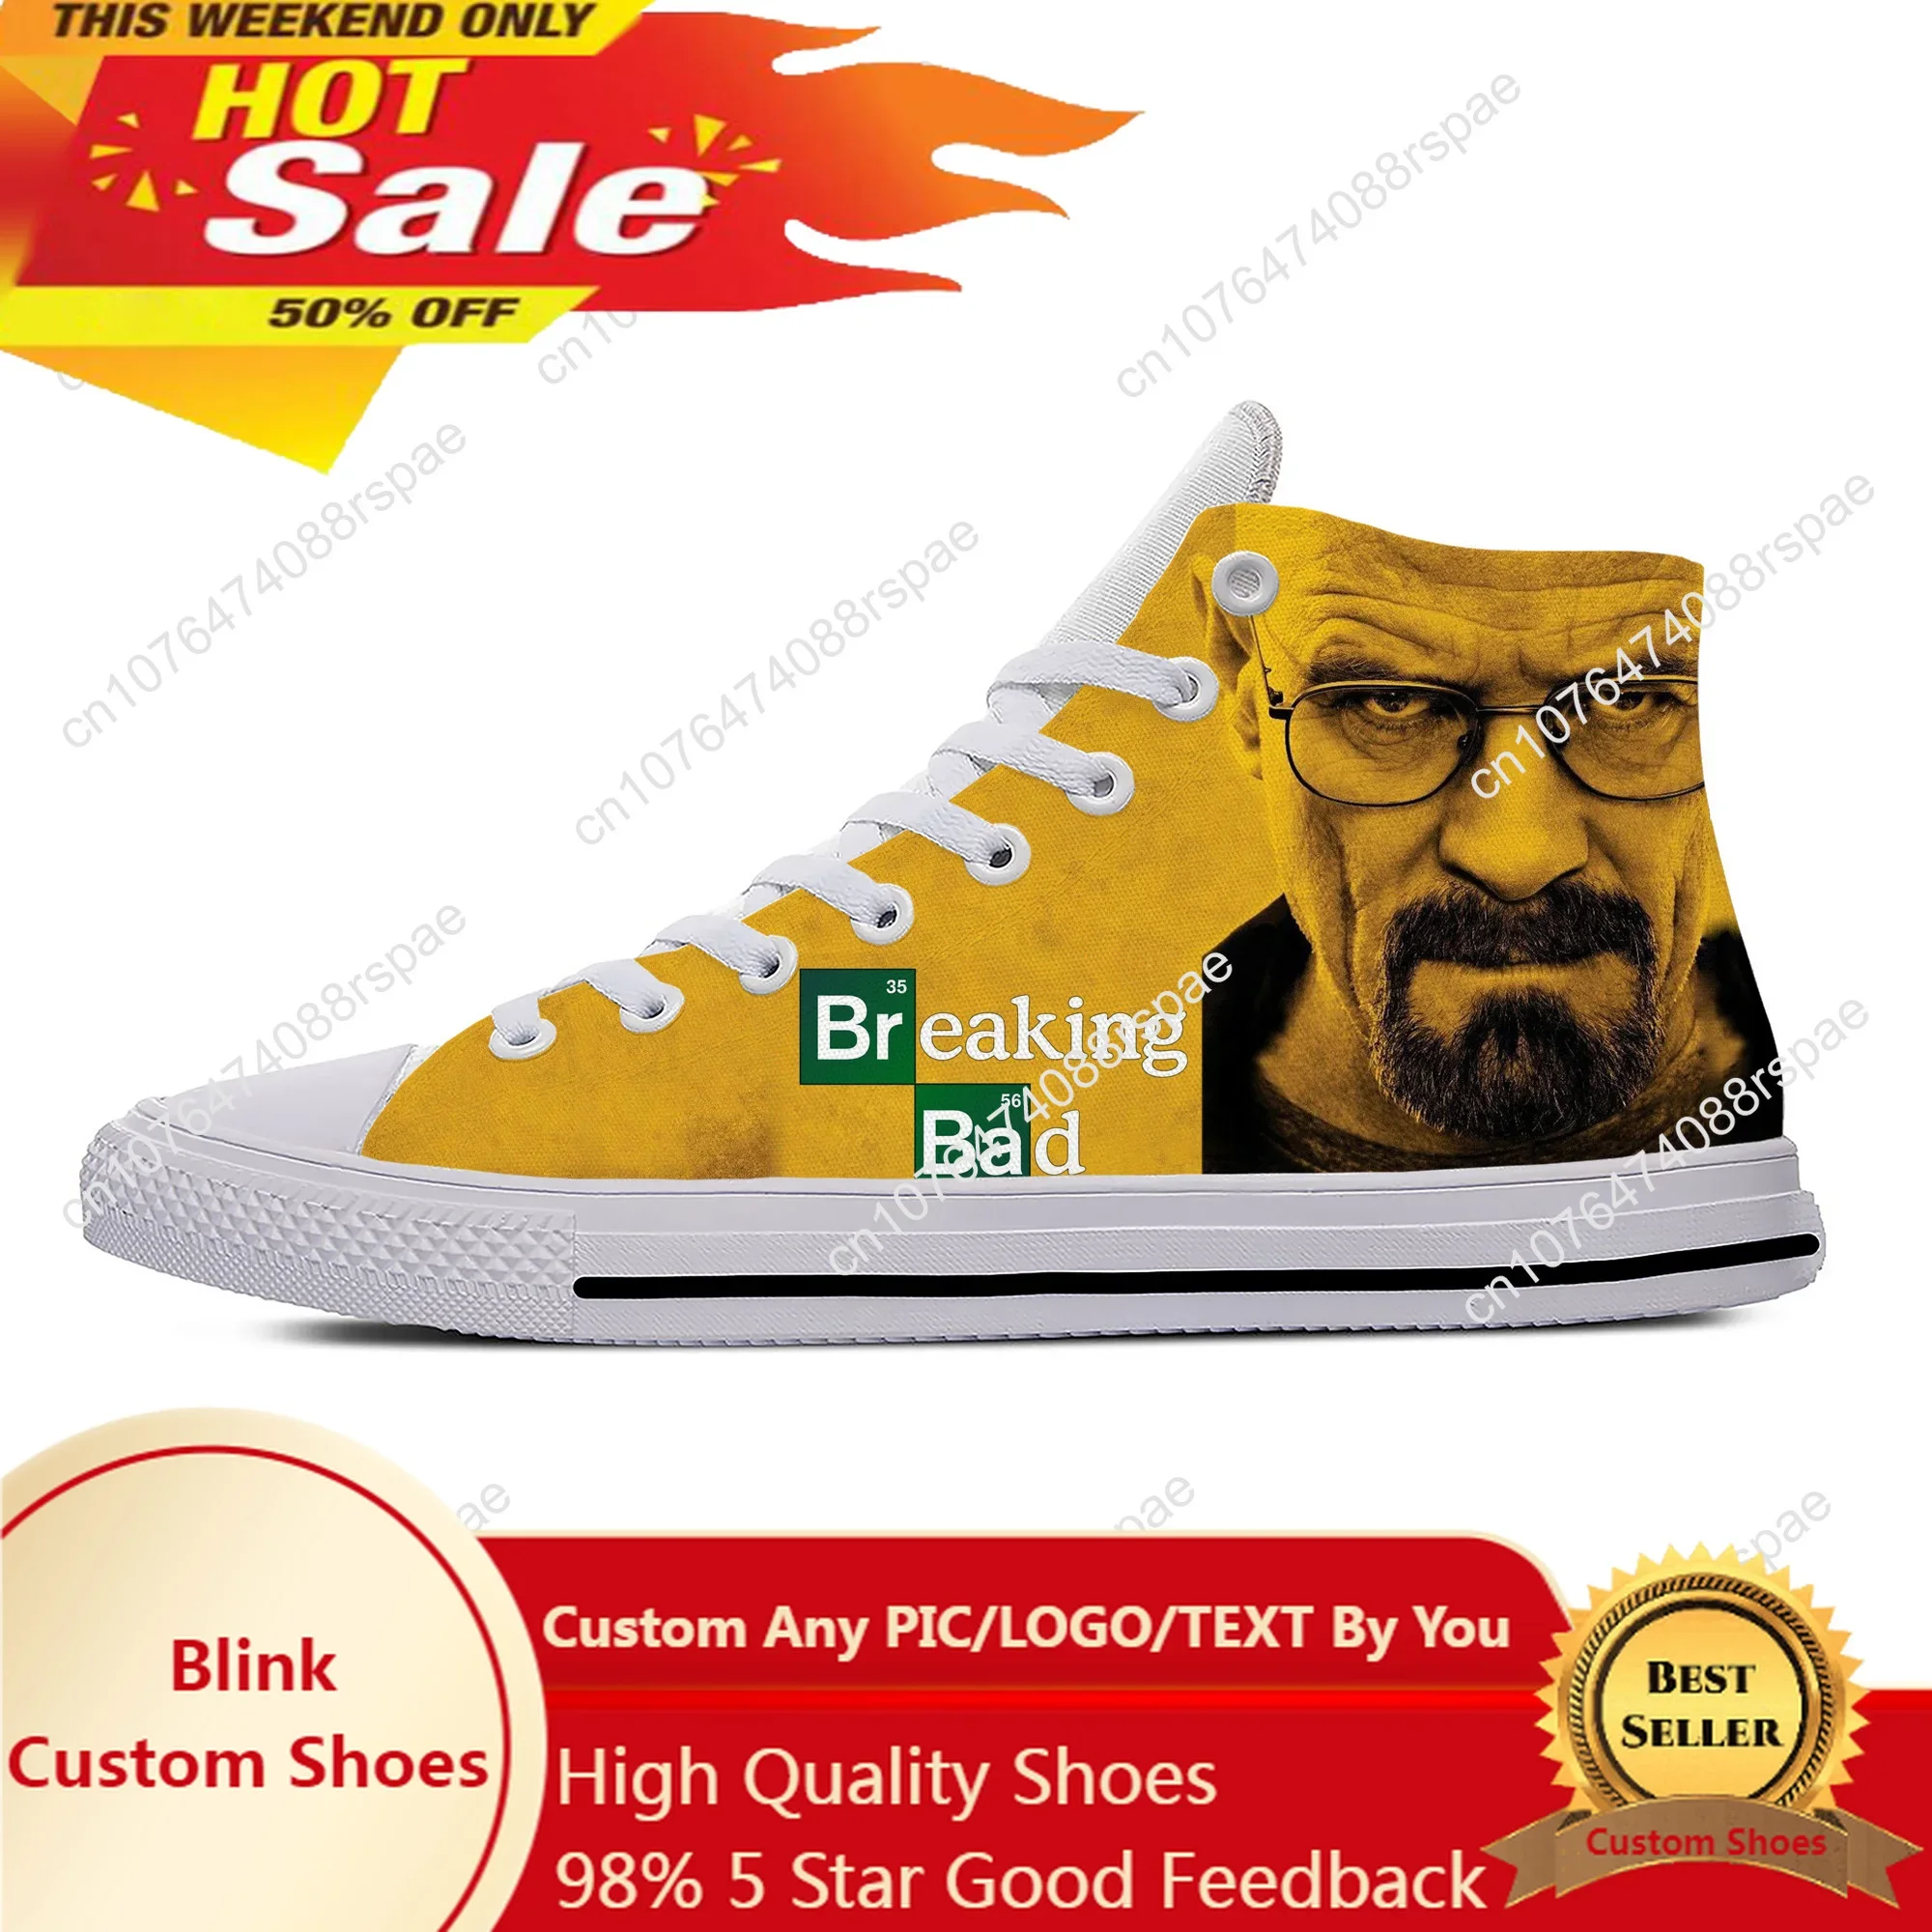 save the turtles high top sneakers mens womens teenager casual shoes canvas running shoes 3d print breathable lightweight shoe Movie Breaking Bad High Top Sneakers Mens Womens Teenager Casual Shoes Canvas Running Shoes 3D Print Breathable Lightweight shoe